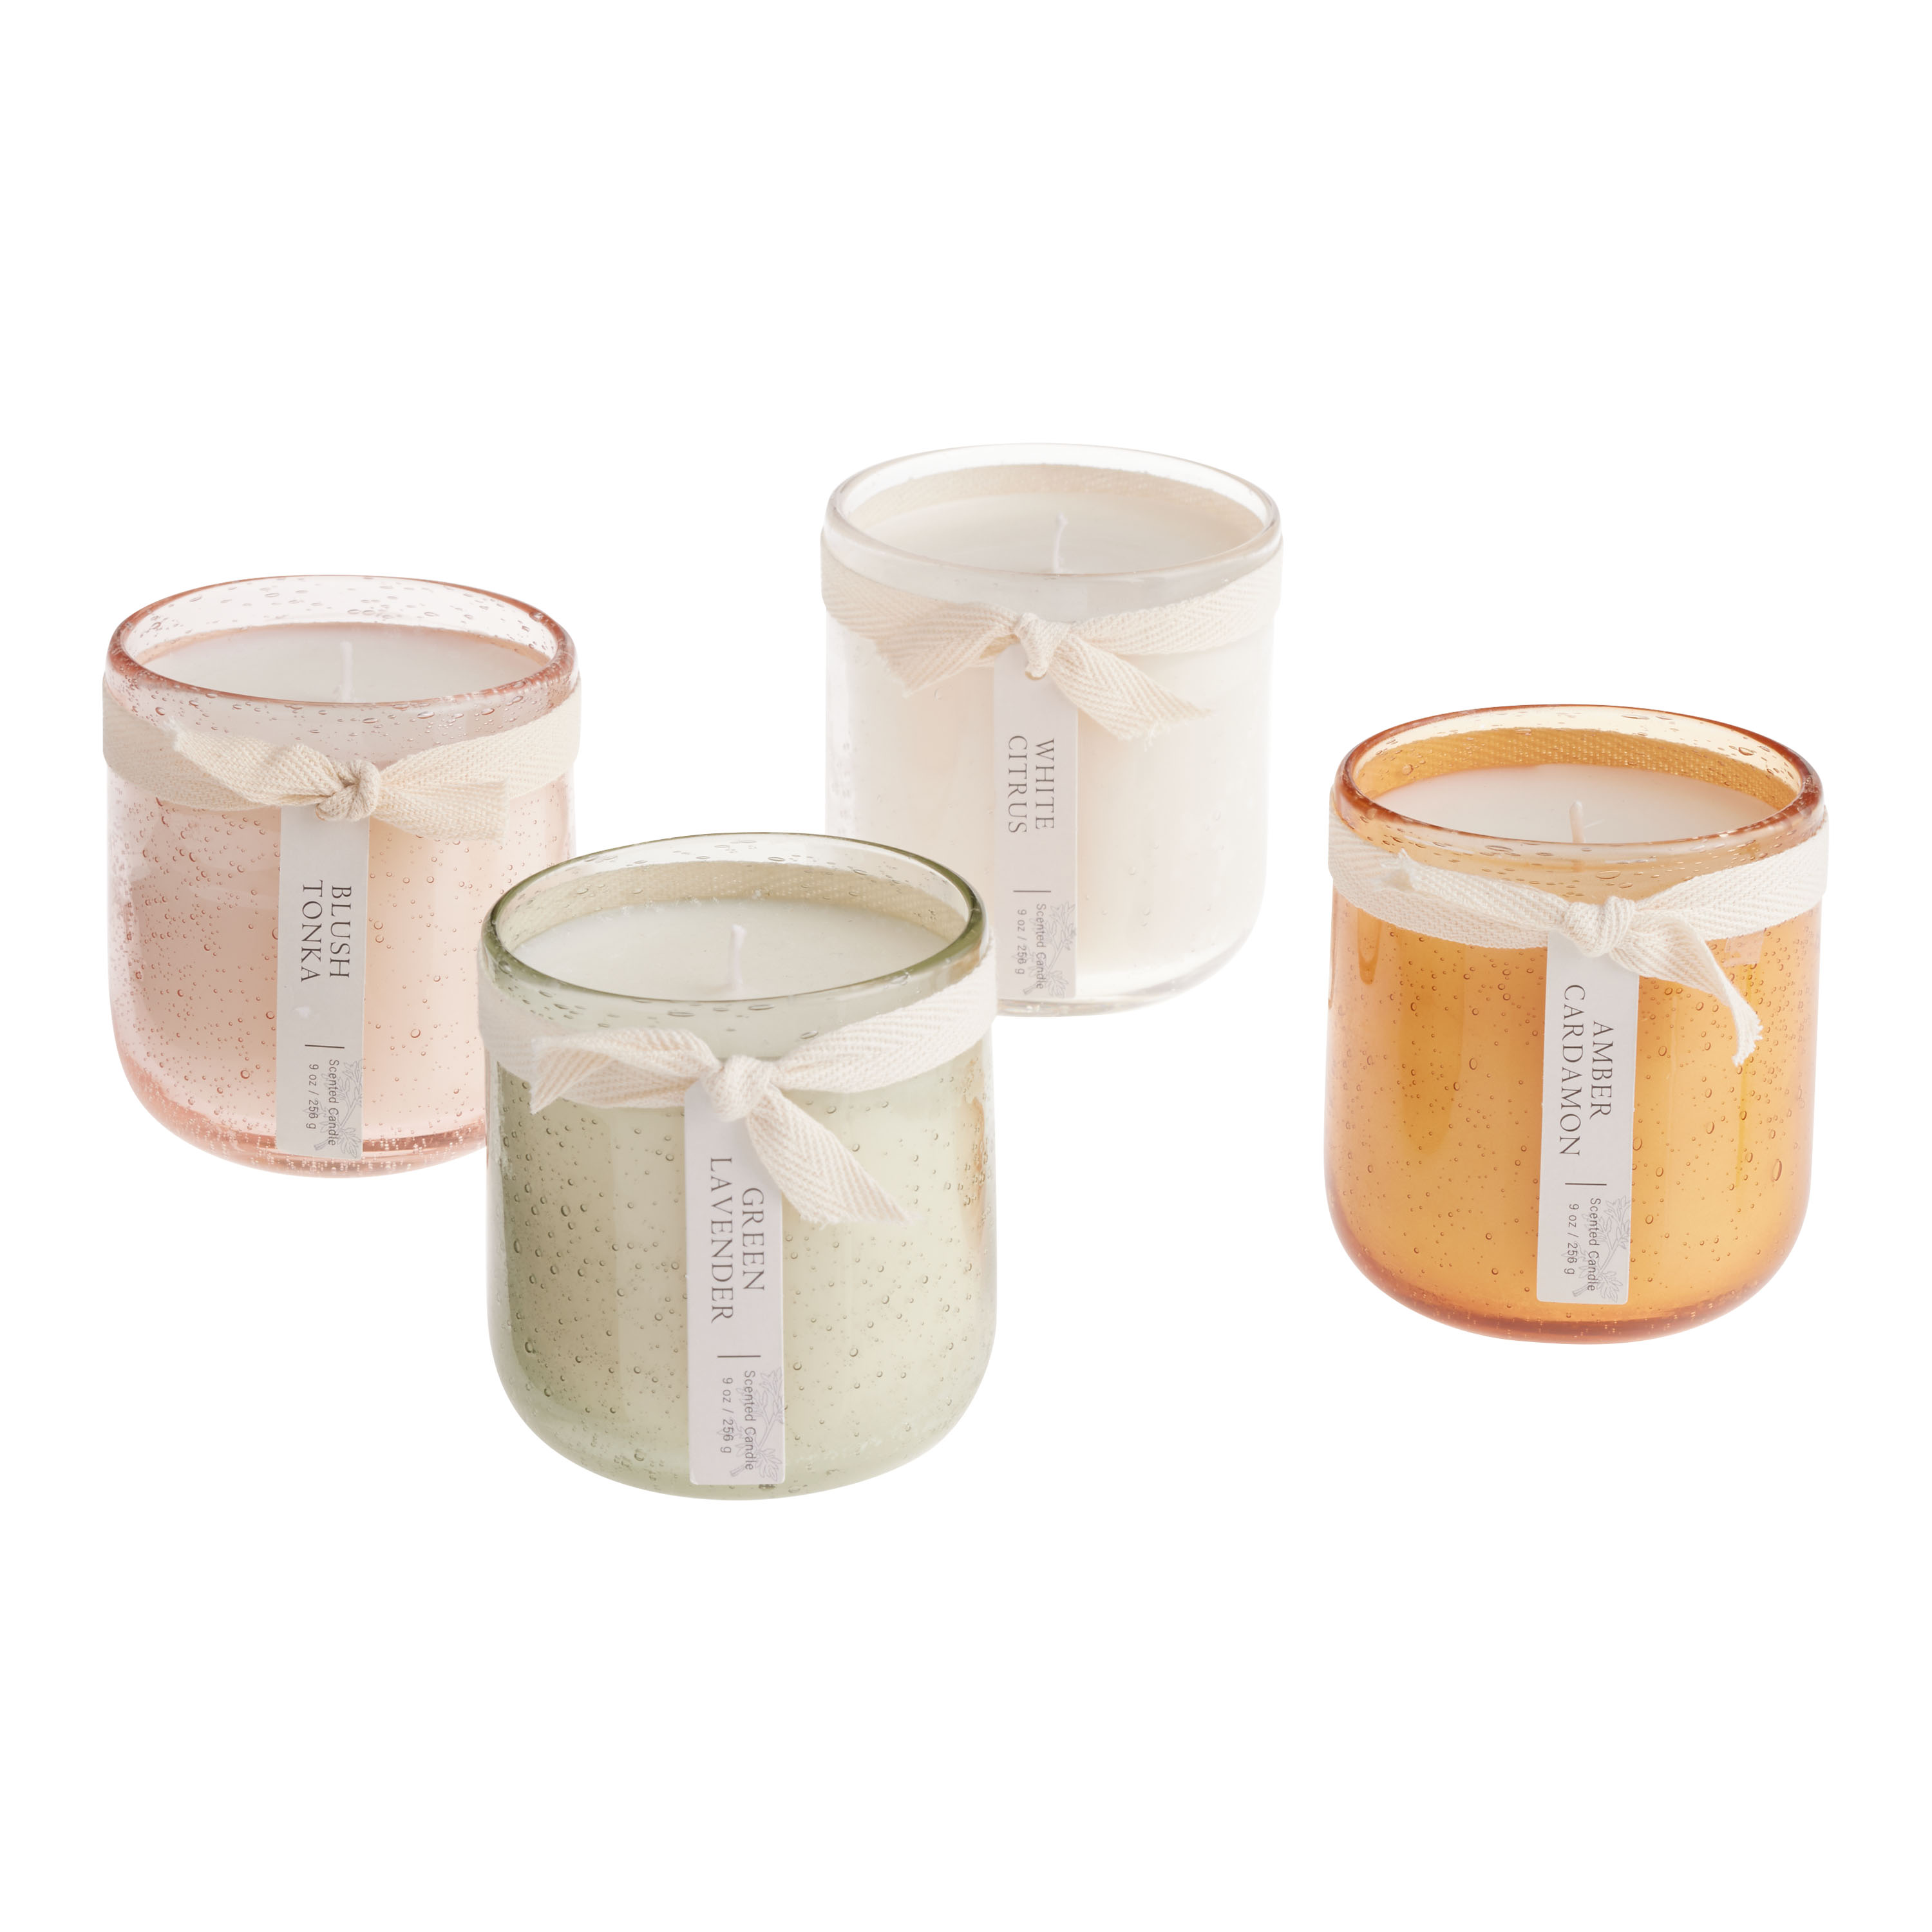 Rustic - All Candles- Rainbow Glass, Rustic & Tins - Southern